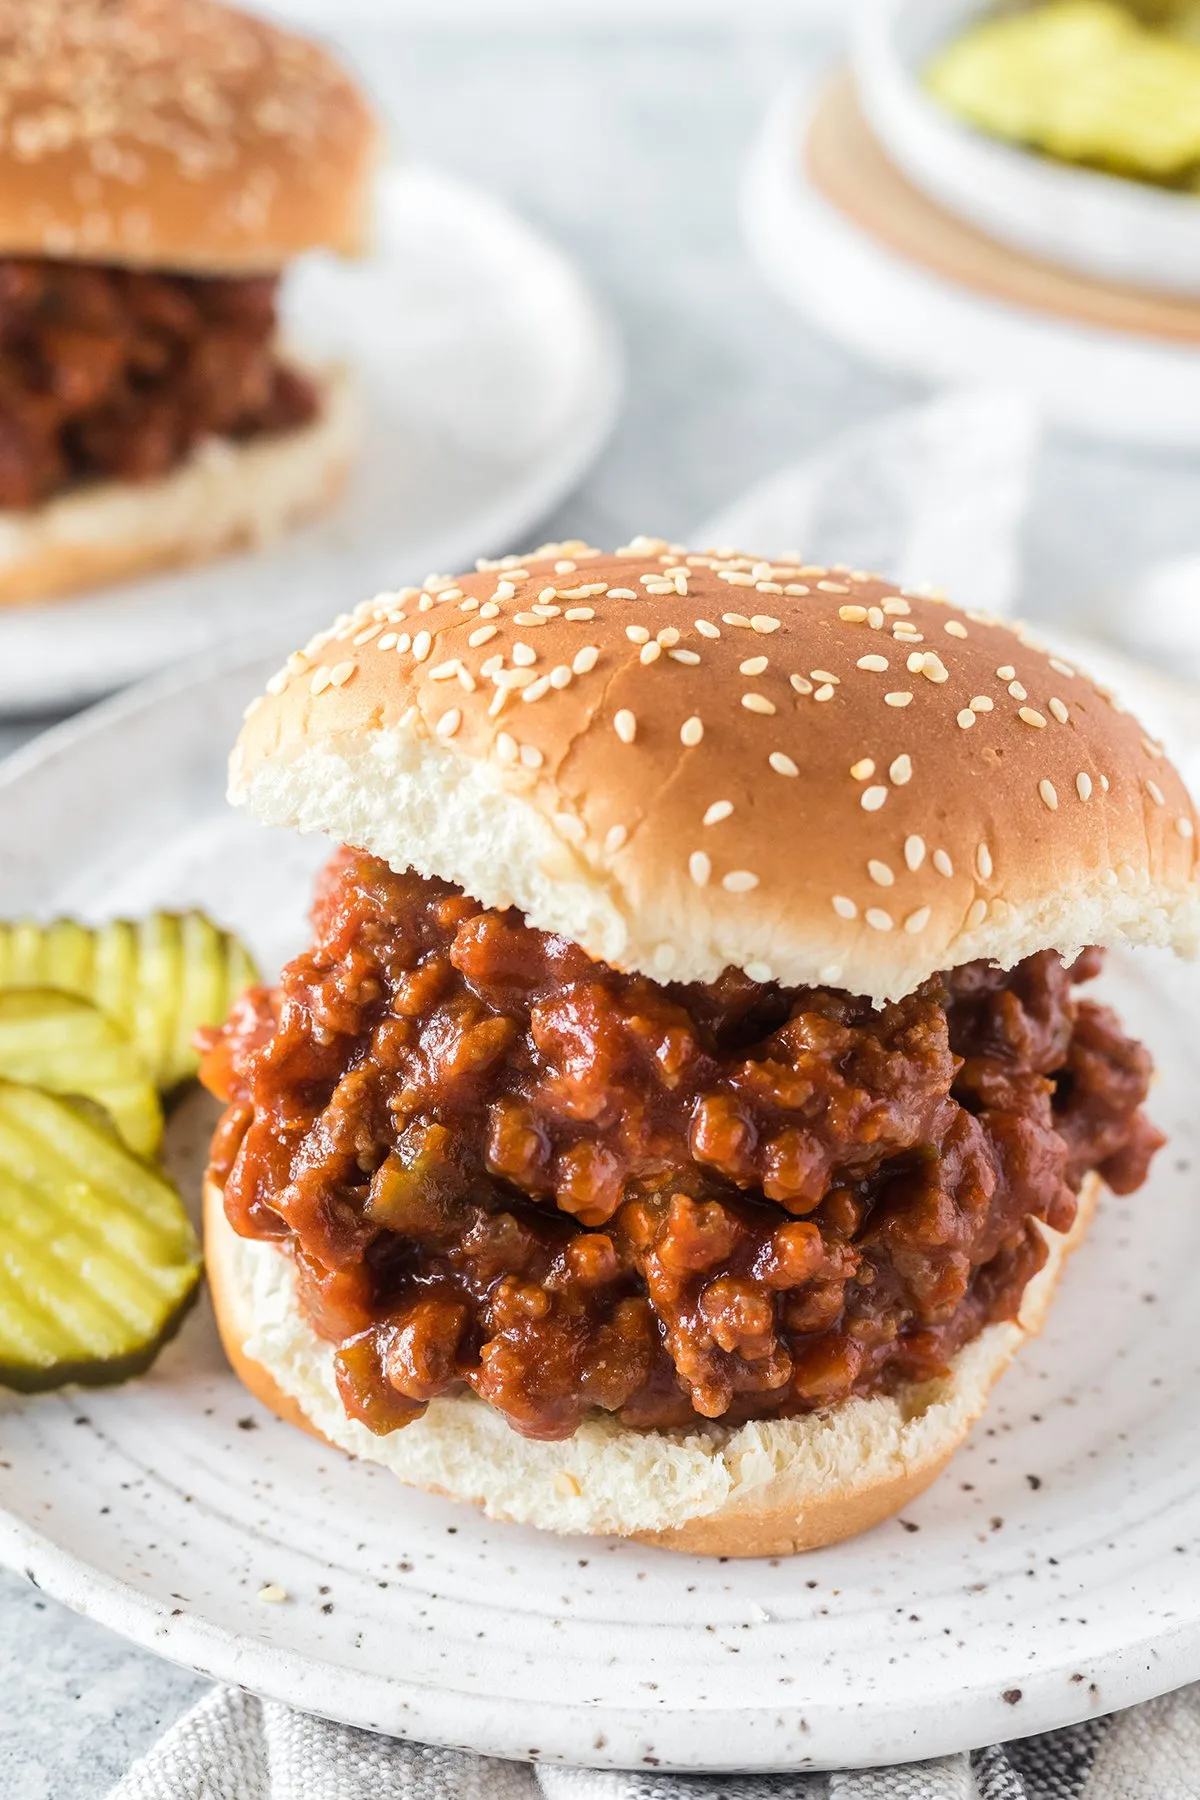 thick sloppy joes on buns with pickles.